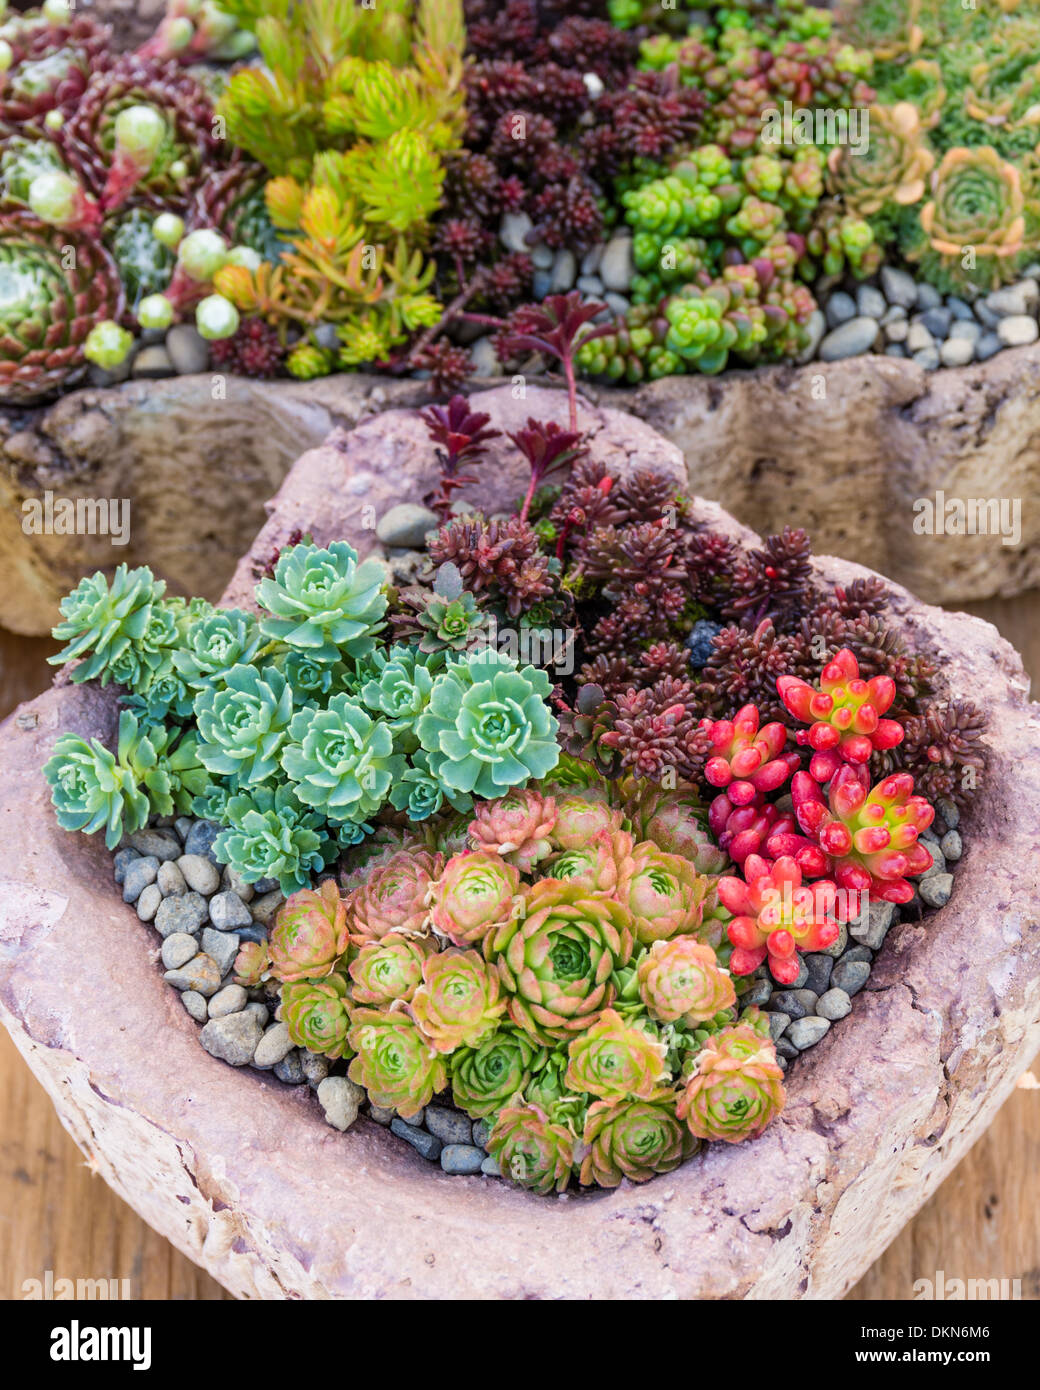 Sedum and sempervivium plants suitable for green roof applications Stock Photo